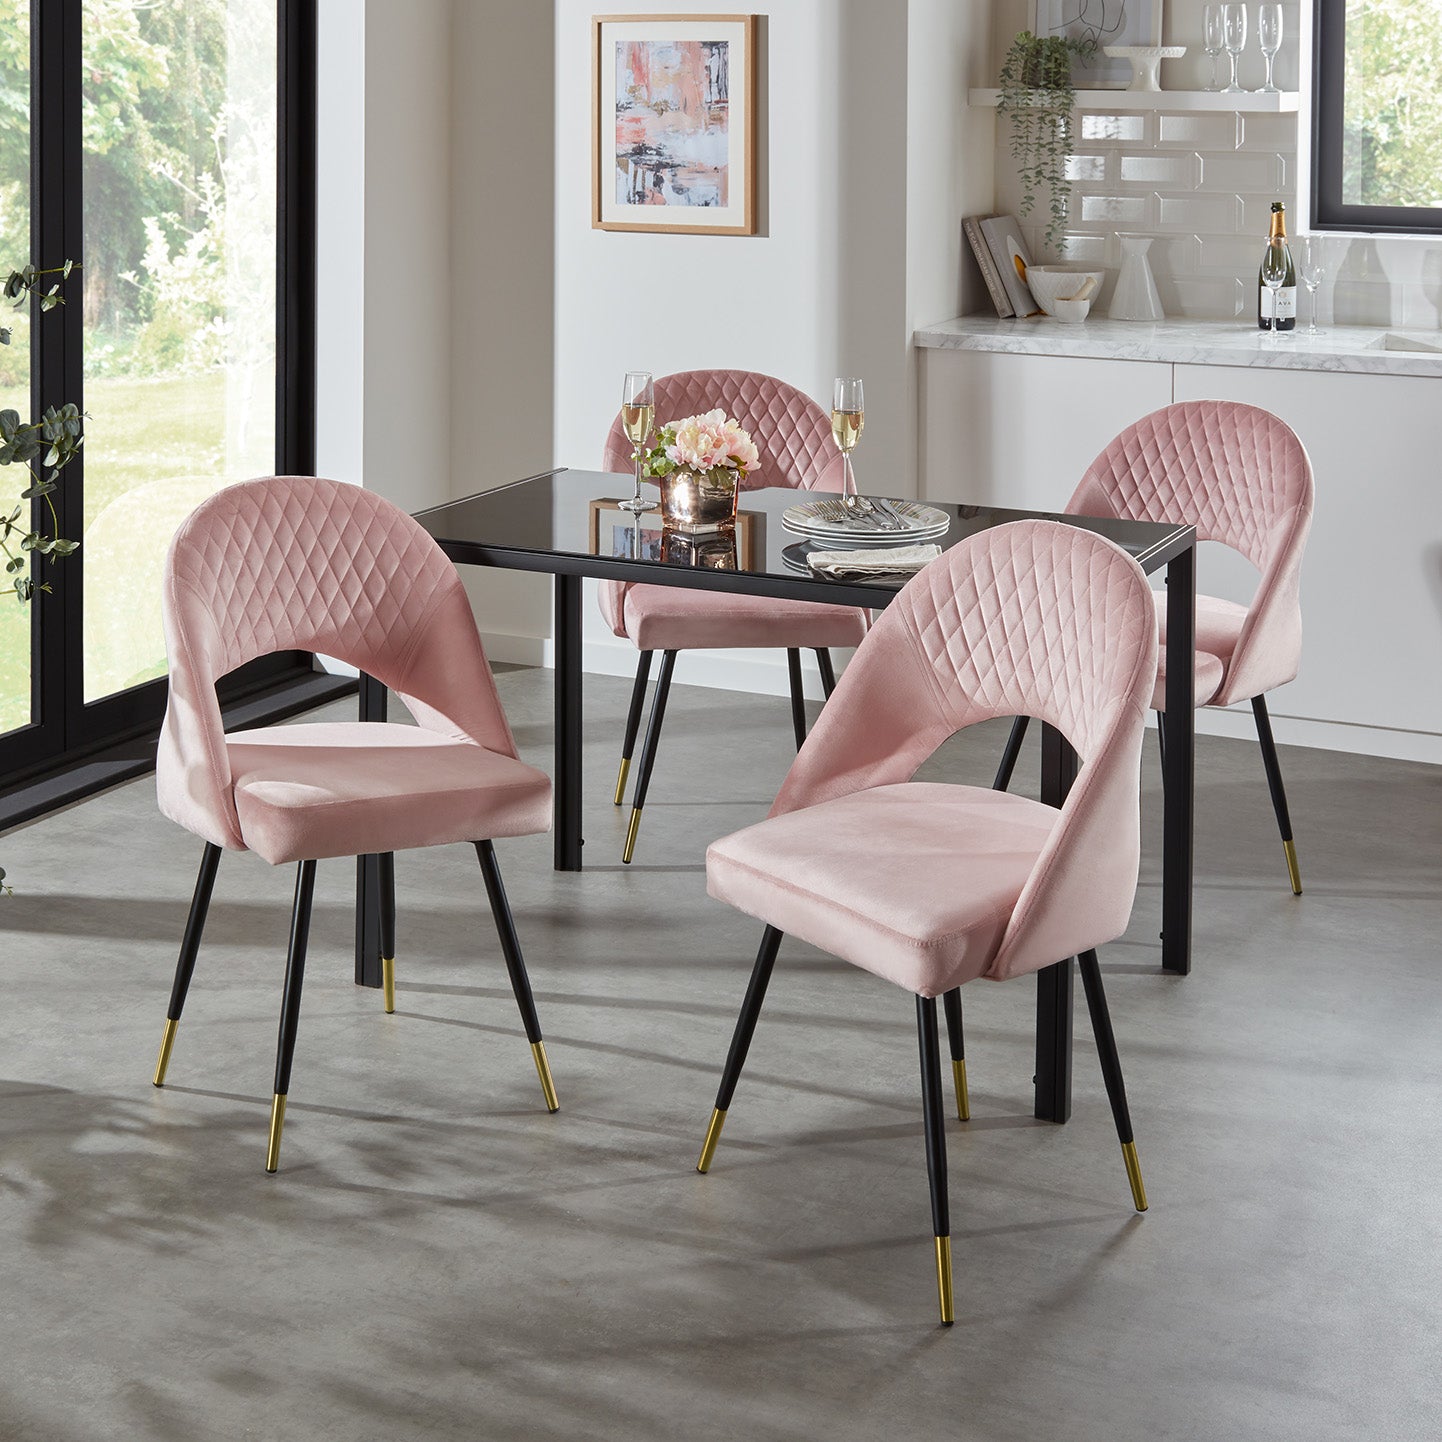 Marilyn dining chairs - set of 2 - pink velvet - Laura James